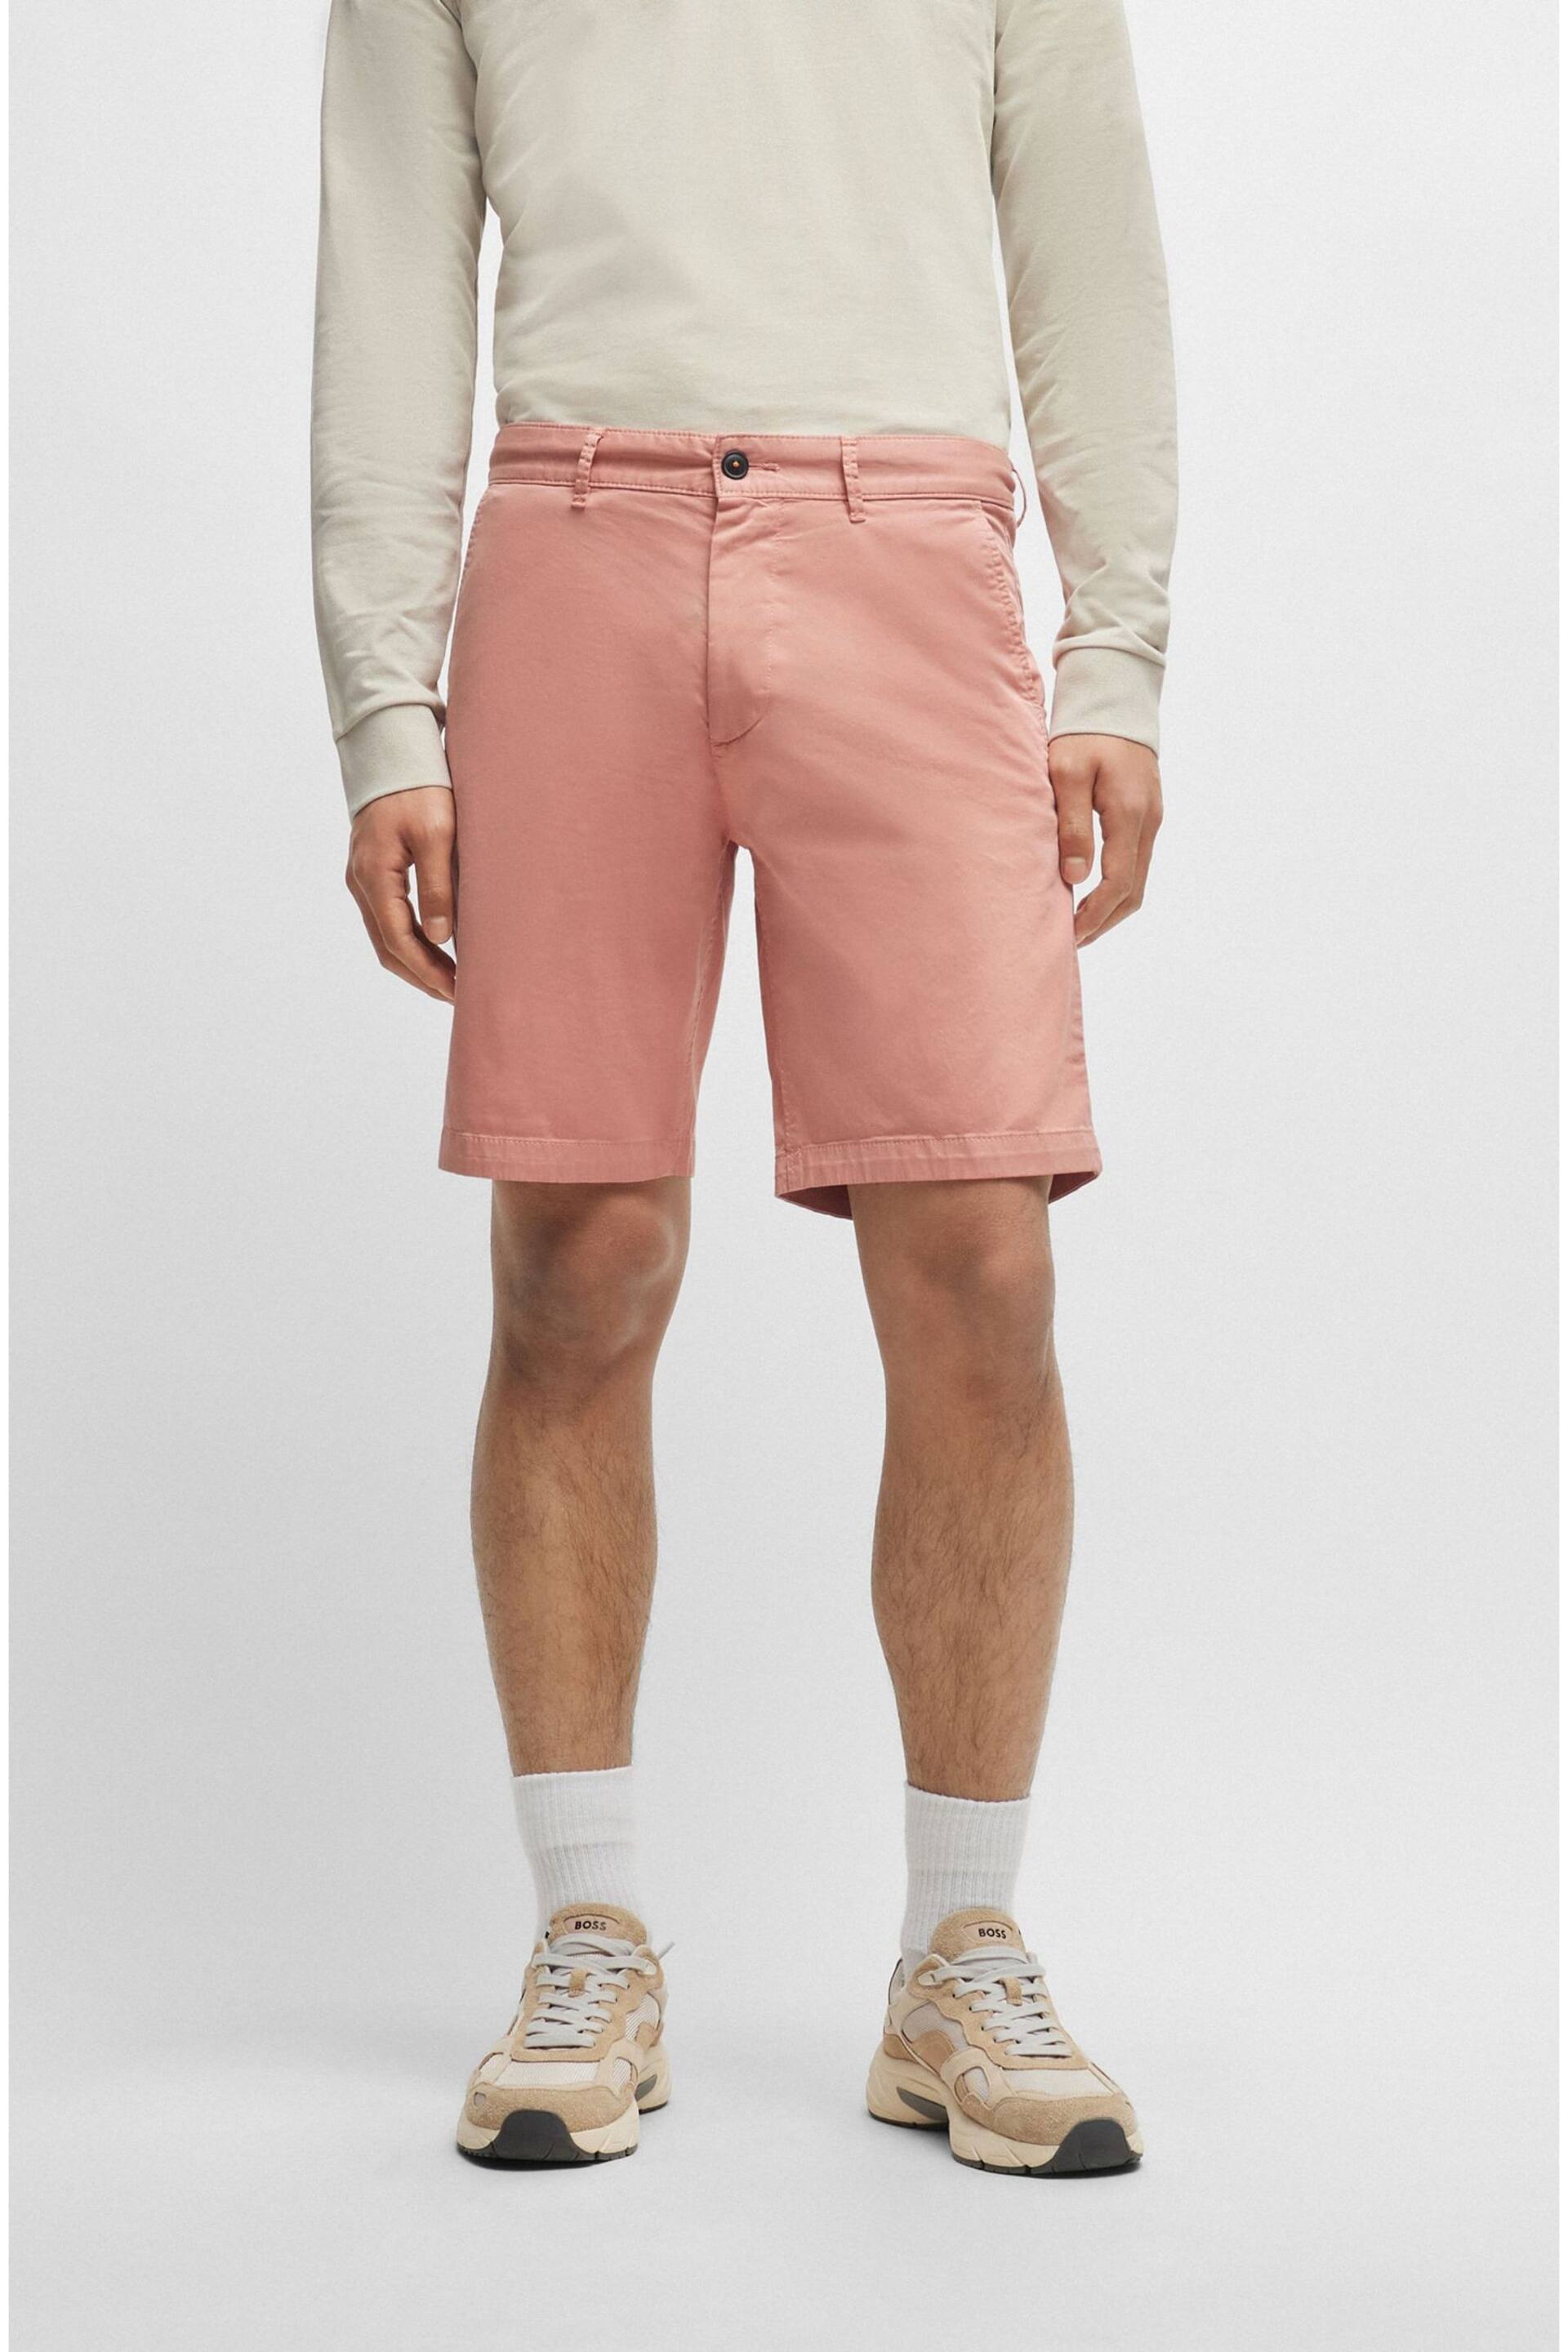 BOSS Pink Slim Fit Stretch Cotton Chino Shorts - Image 1 of 5